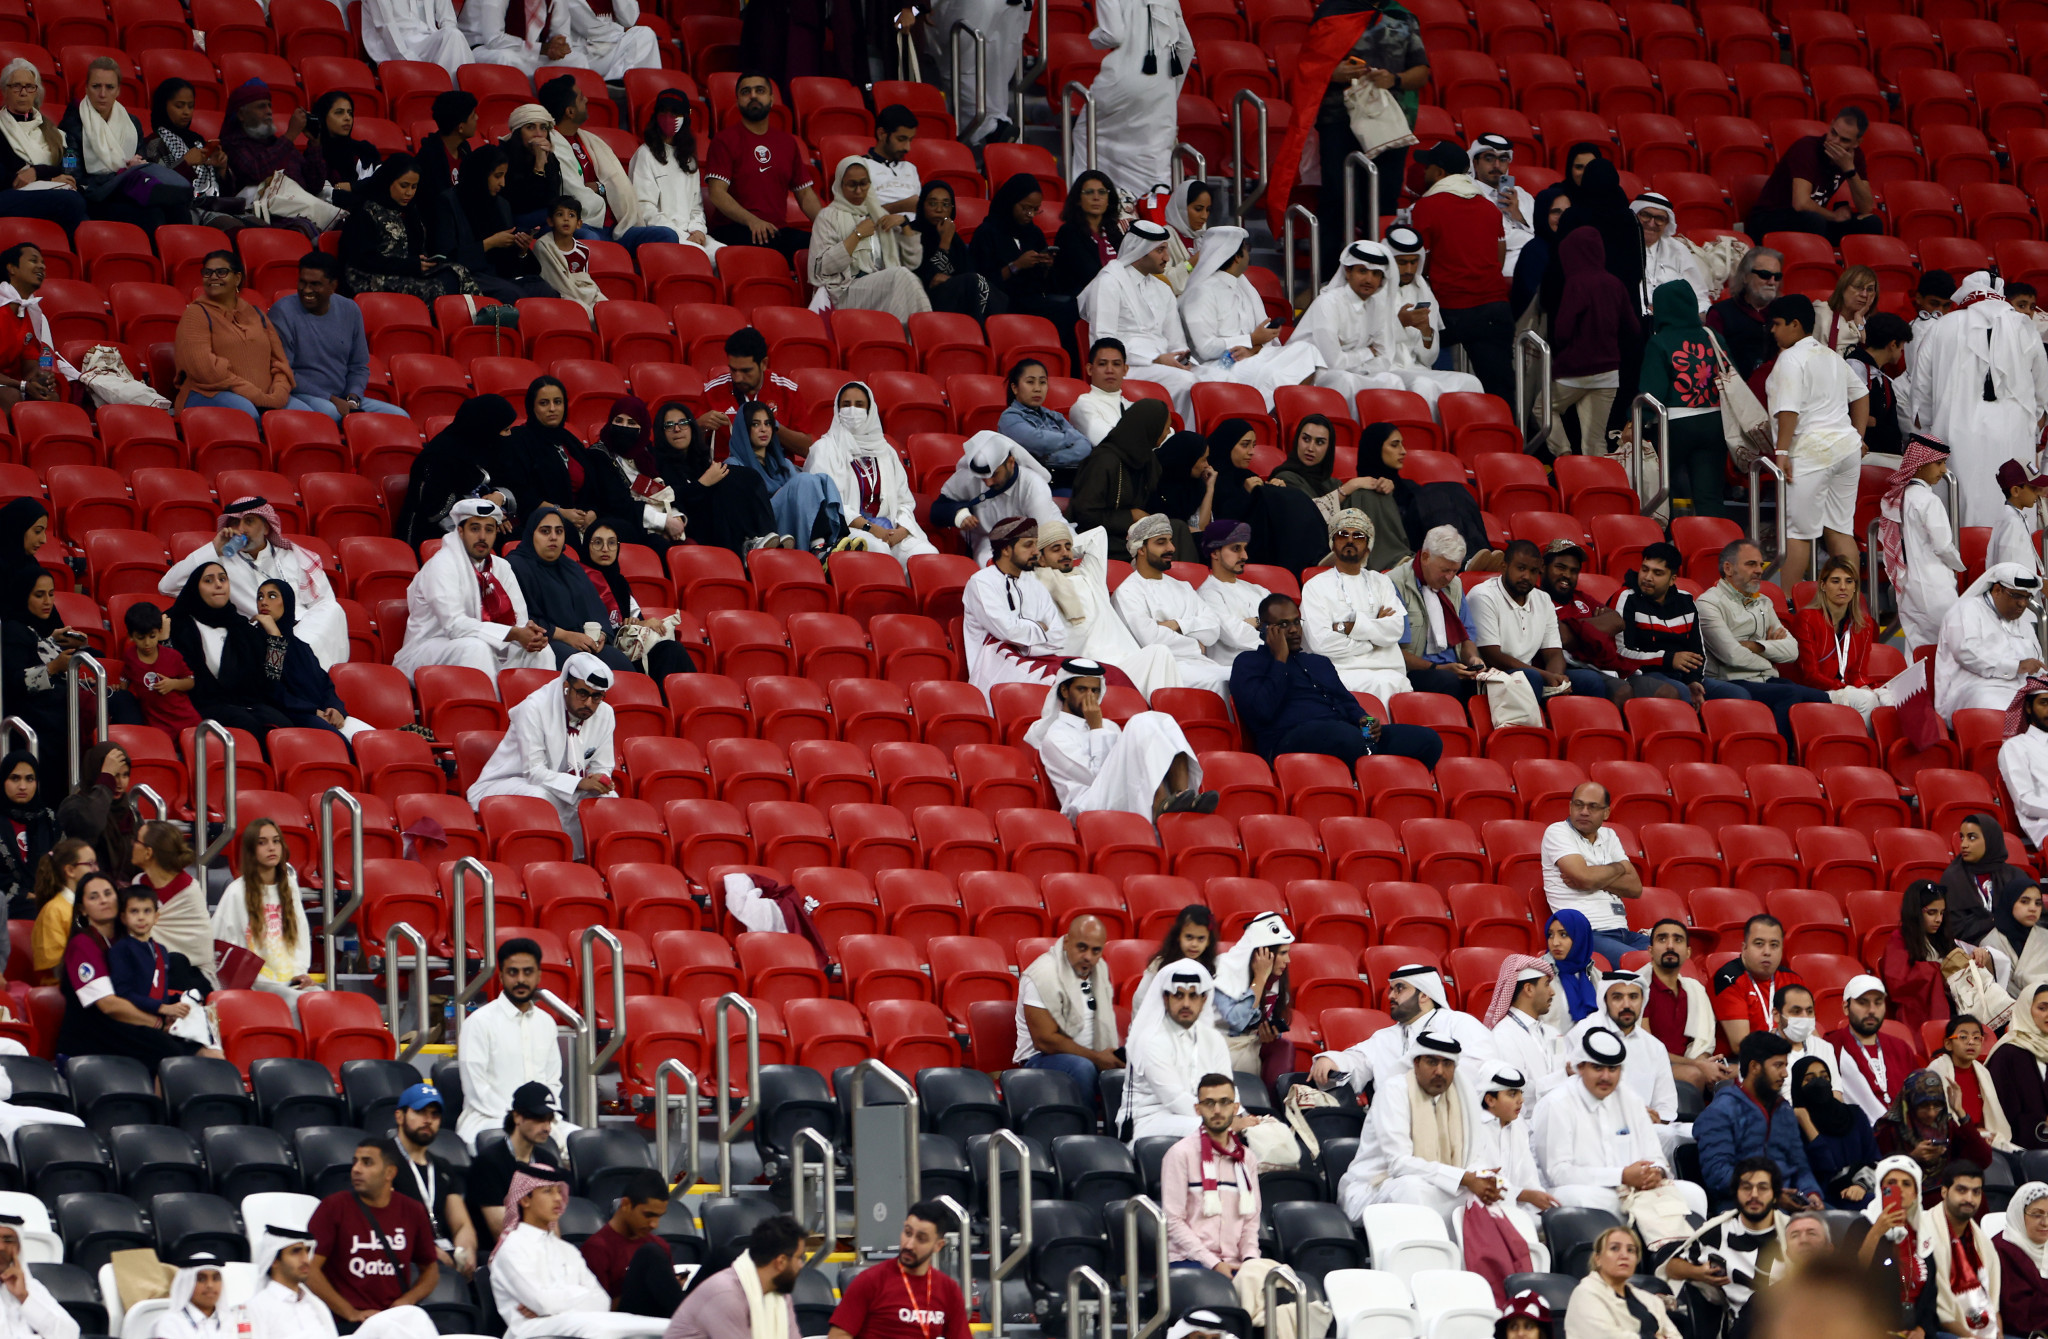 Thousands of Qatar fans left the stadium early when their side were losing to Ecuador in the opening match of the FIFA World Cup ©Getty Images